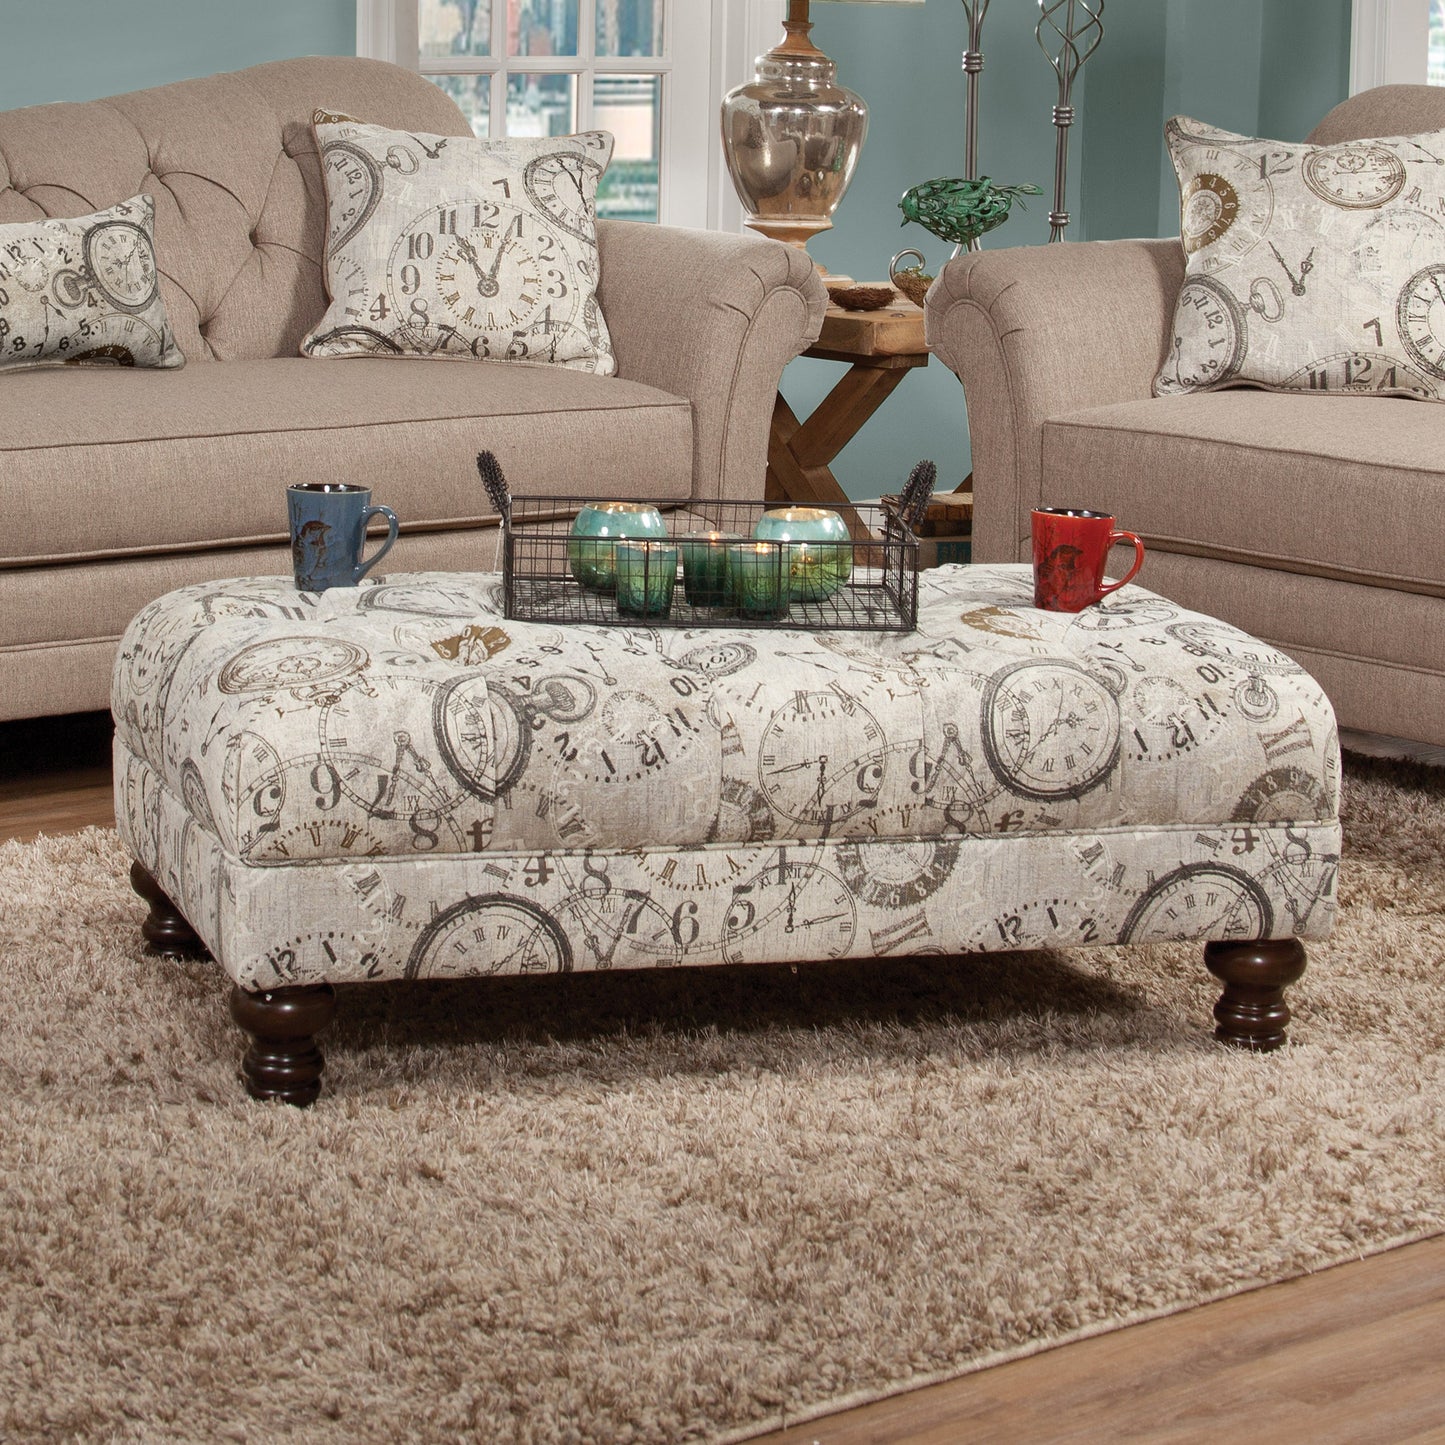 Roundhill Furniture Charbilia Fabric Tufted Cocktail Ottoman in Timeless Patina